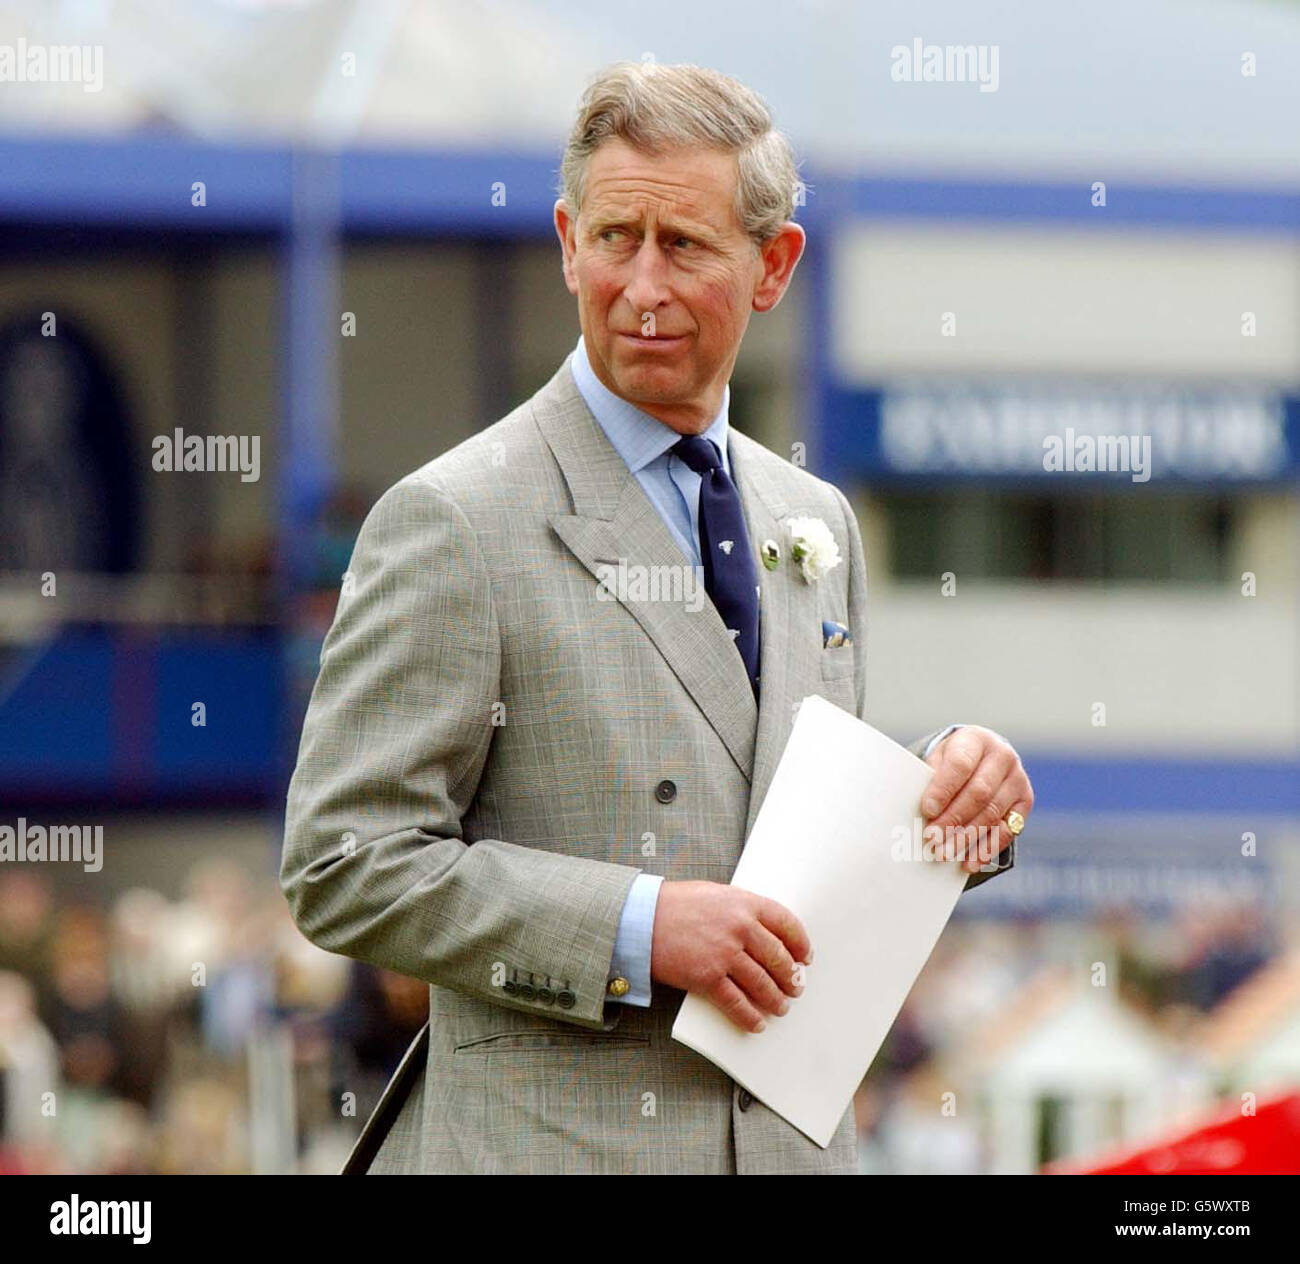 The Prince of Wales prepares to make a speech at the Royal Show, Stoneleigh, Warwickshire. The Prince today warned of the damage being done to the UK countryside from a ready supply of cheap food as he opened this year's Royal Show, the UK's premier agriculture show. * 9/7/02: The Prince of Wales was inspecting work to convert a power station into an art gallery. Charles was visiting Wapping Hydraulic Power Station, in east London, which is being transformed in a bid to regenerate the area. His visit marks the launch of a project aiming to encourage local communities to help rescue historic Stock Photo